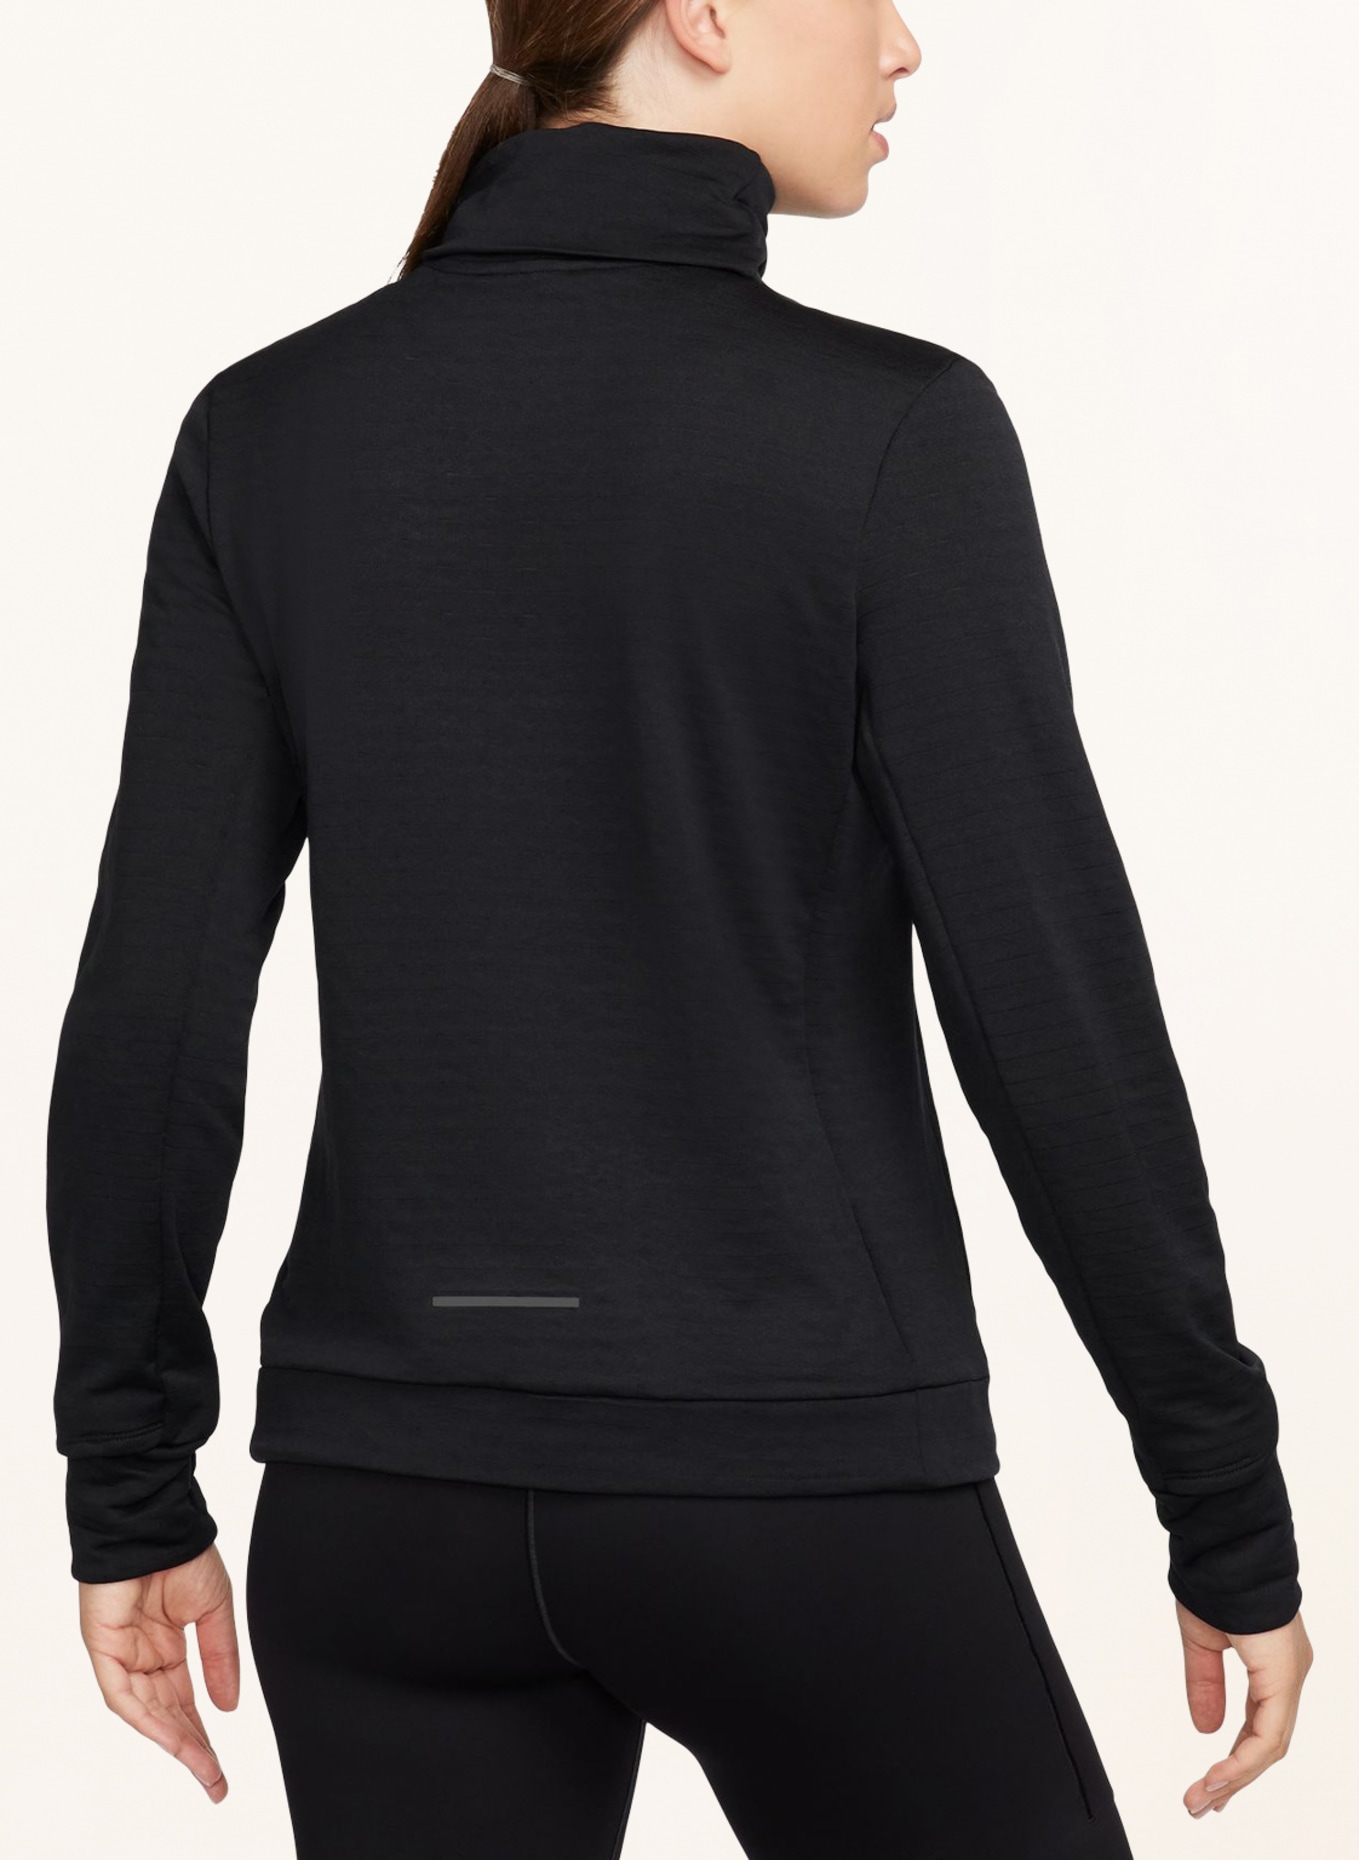 Nike Running shirt THERMA-FIT SWIFT ELEMENT, Color: BLACK (Image 3)